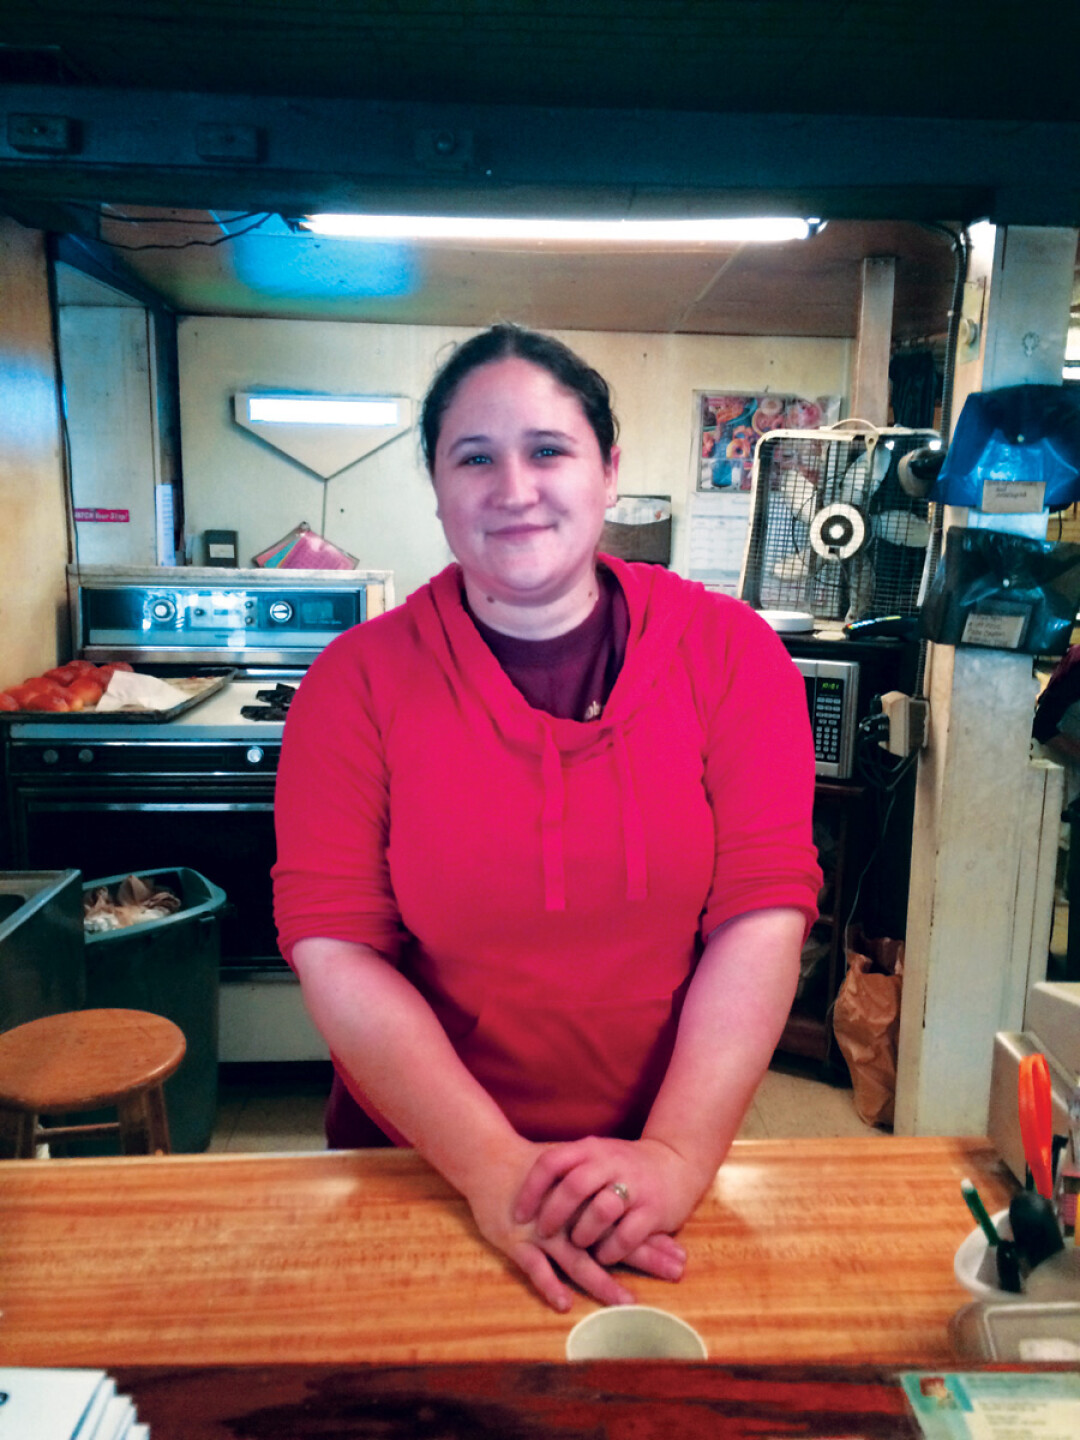 VIVA LA VIE BOHEME. Laura McNamara is the new manager of the Bohemian Ovens, an acclaimed bakery in Bloomer. A longtime employee, McNamara said she will do her best to maintain the traditional atmosphere.